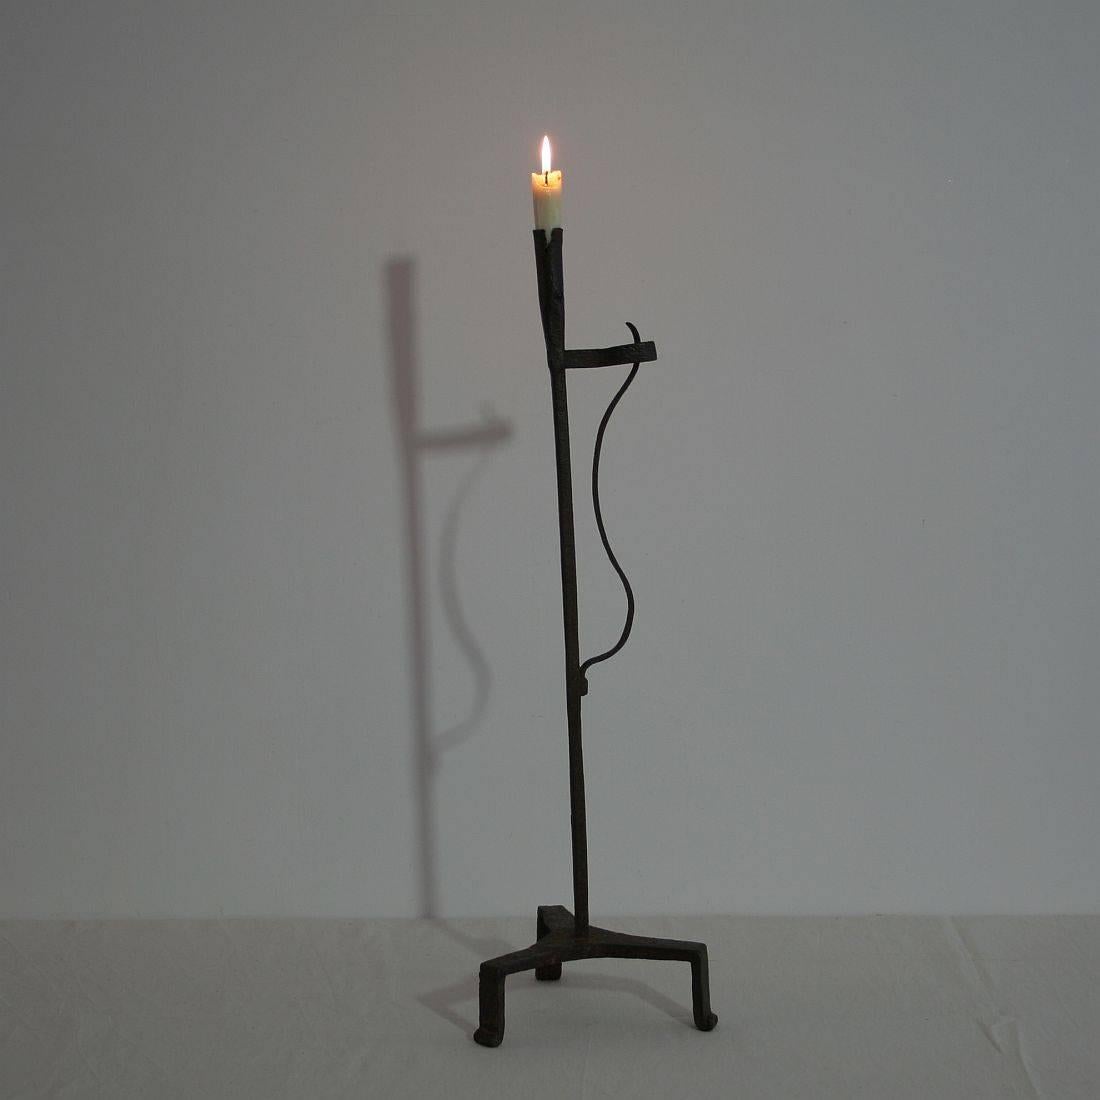 Very old and beautiful hand-forged iron candleholder
France, circa 1700-1750.